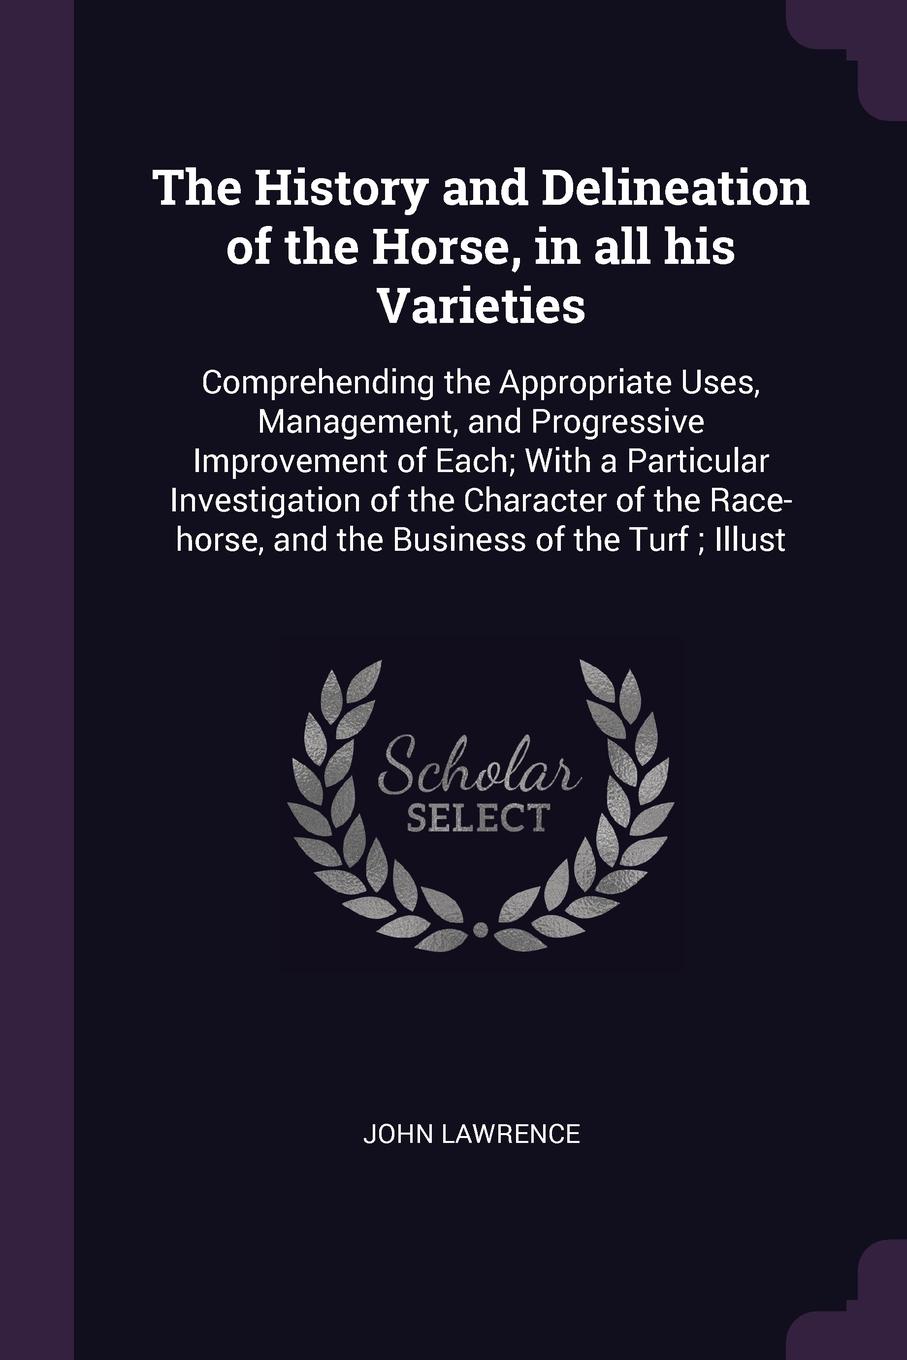 The History and Delineation of the Horse, in all his Varieties. Comprehending the Appropriate Uses, Management, and Progressive Improvement of Each; With a Particular Investigation of the Character of the Race-horse, and the Business of the Turf ;...